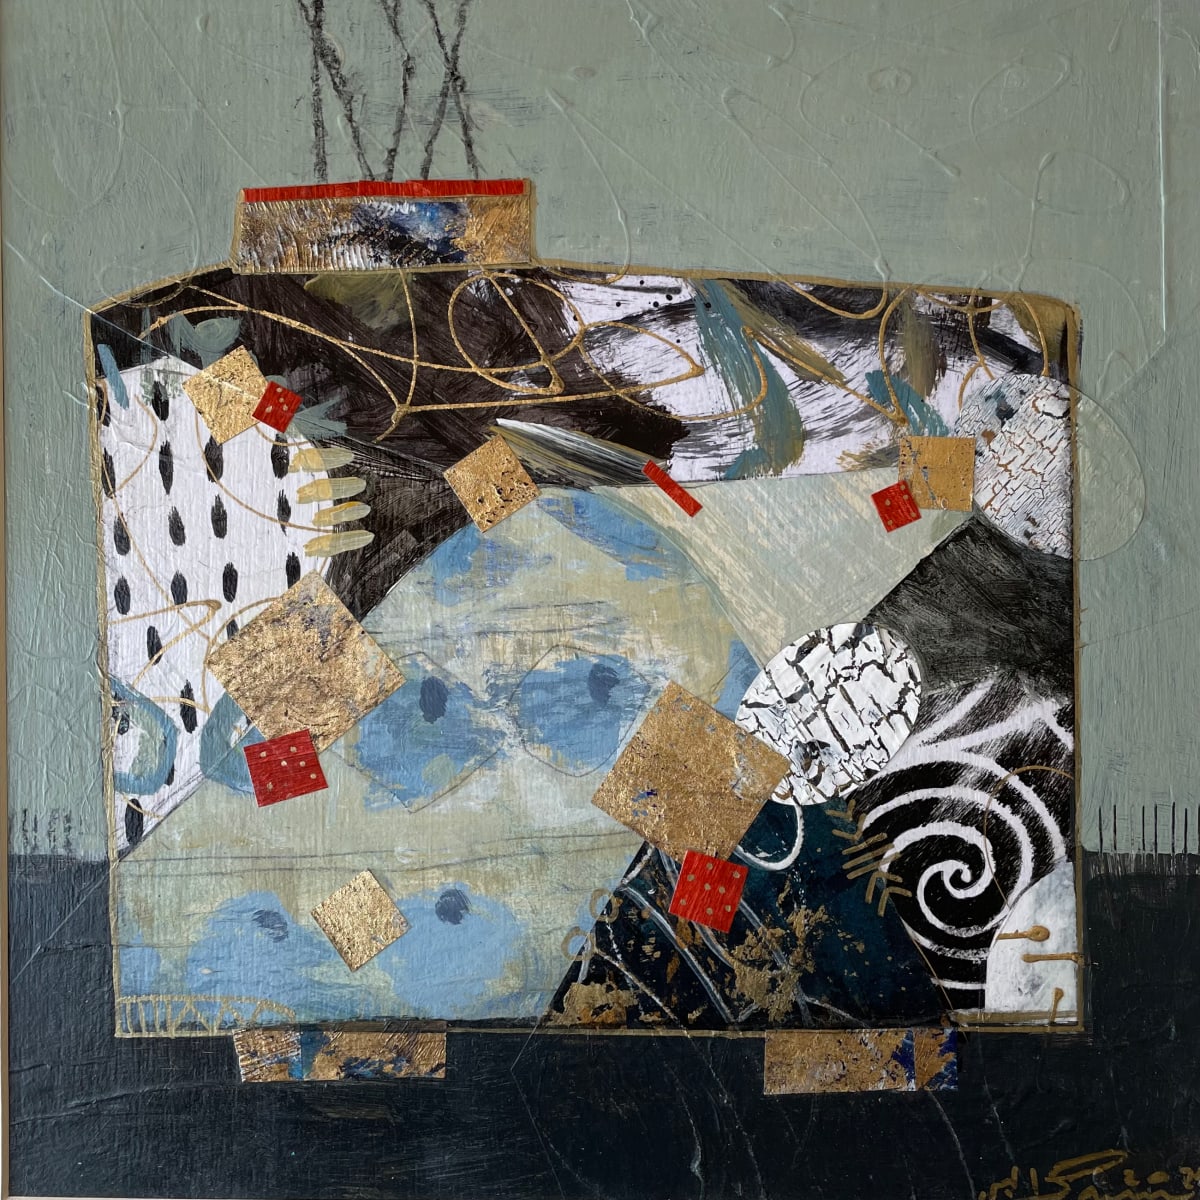 Oriental Glimpses - 449 by Samar Albader  Image: Mixed Media painting, with white Matt Board and Silver Frame.
Framed Size:   48x48cm
Painting size : 30x30cm
Ready to Hang